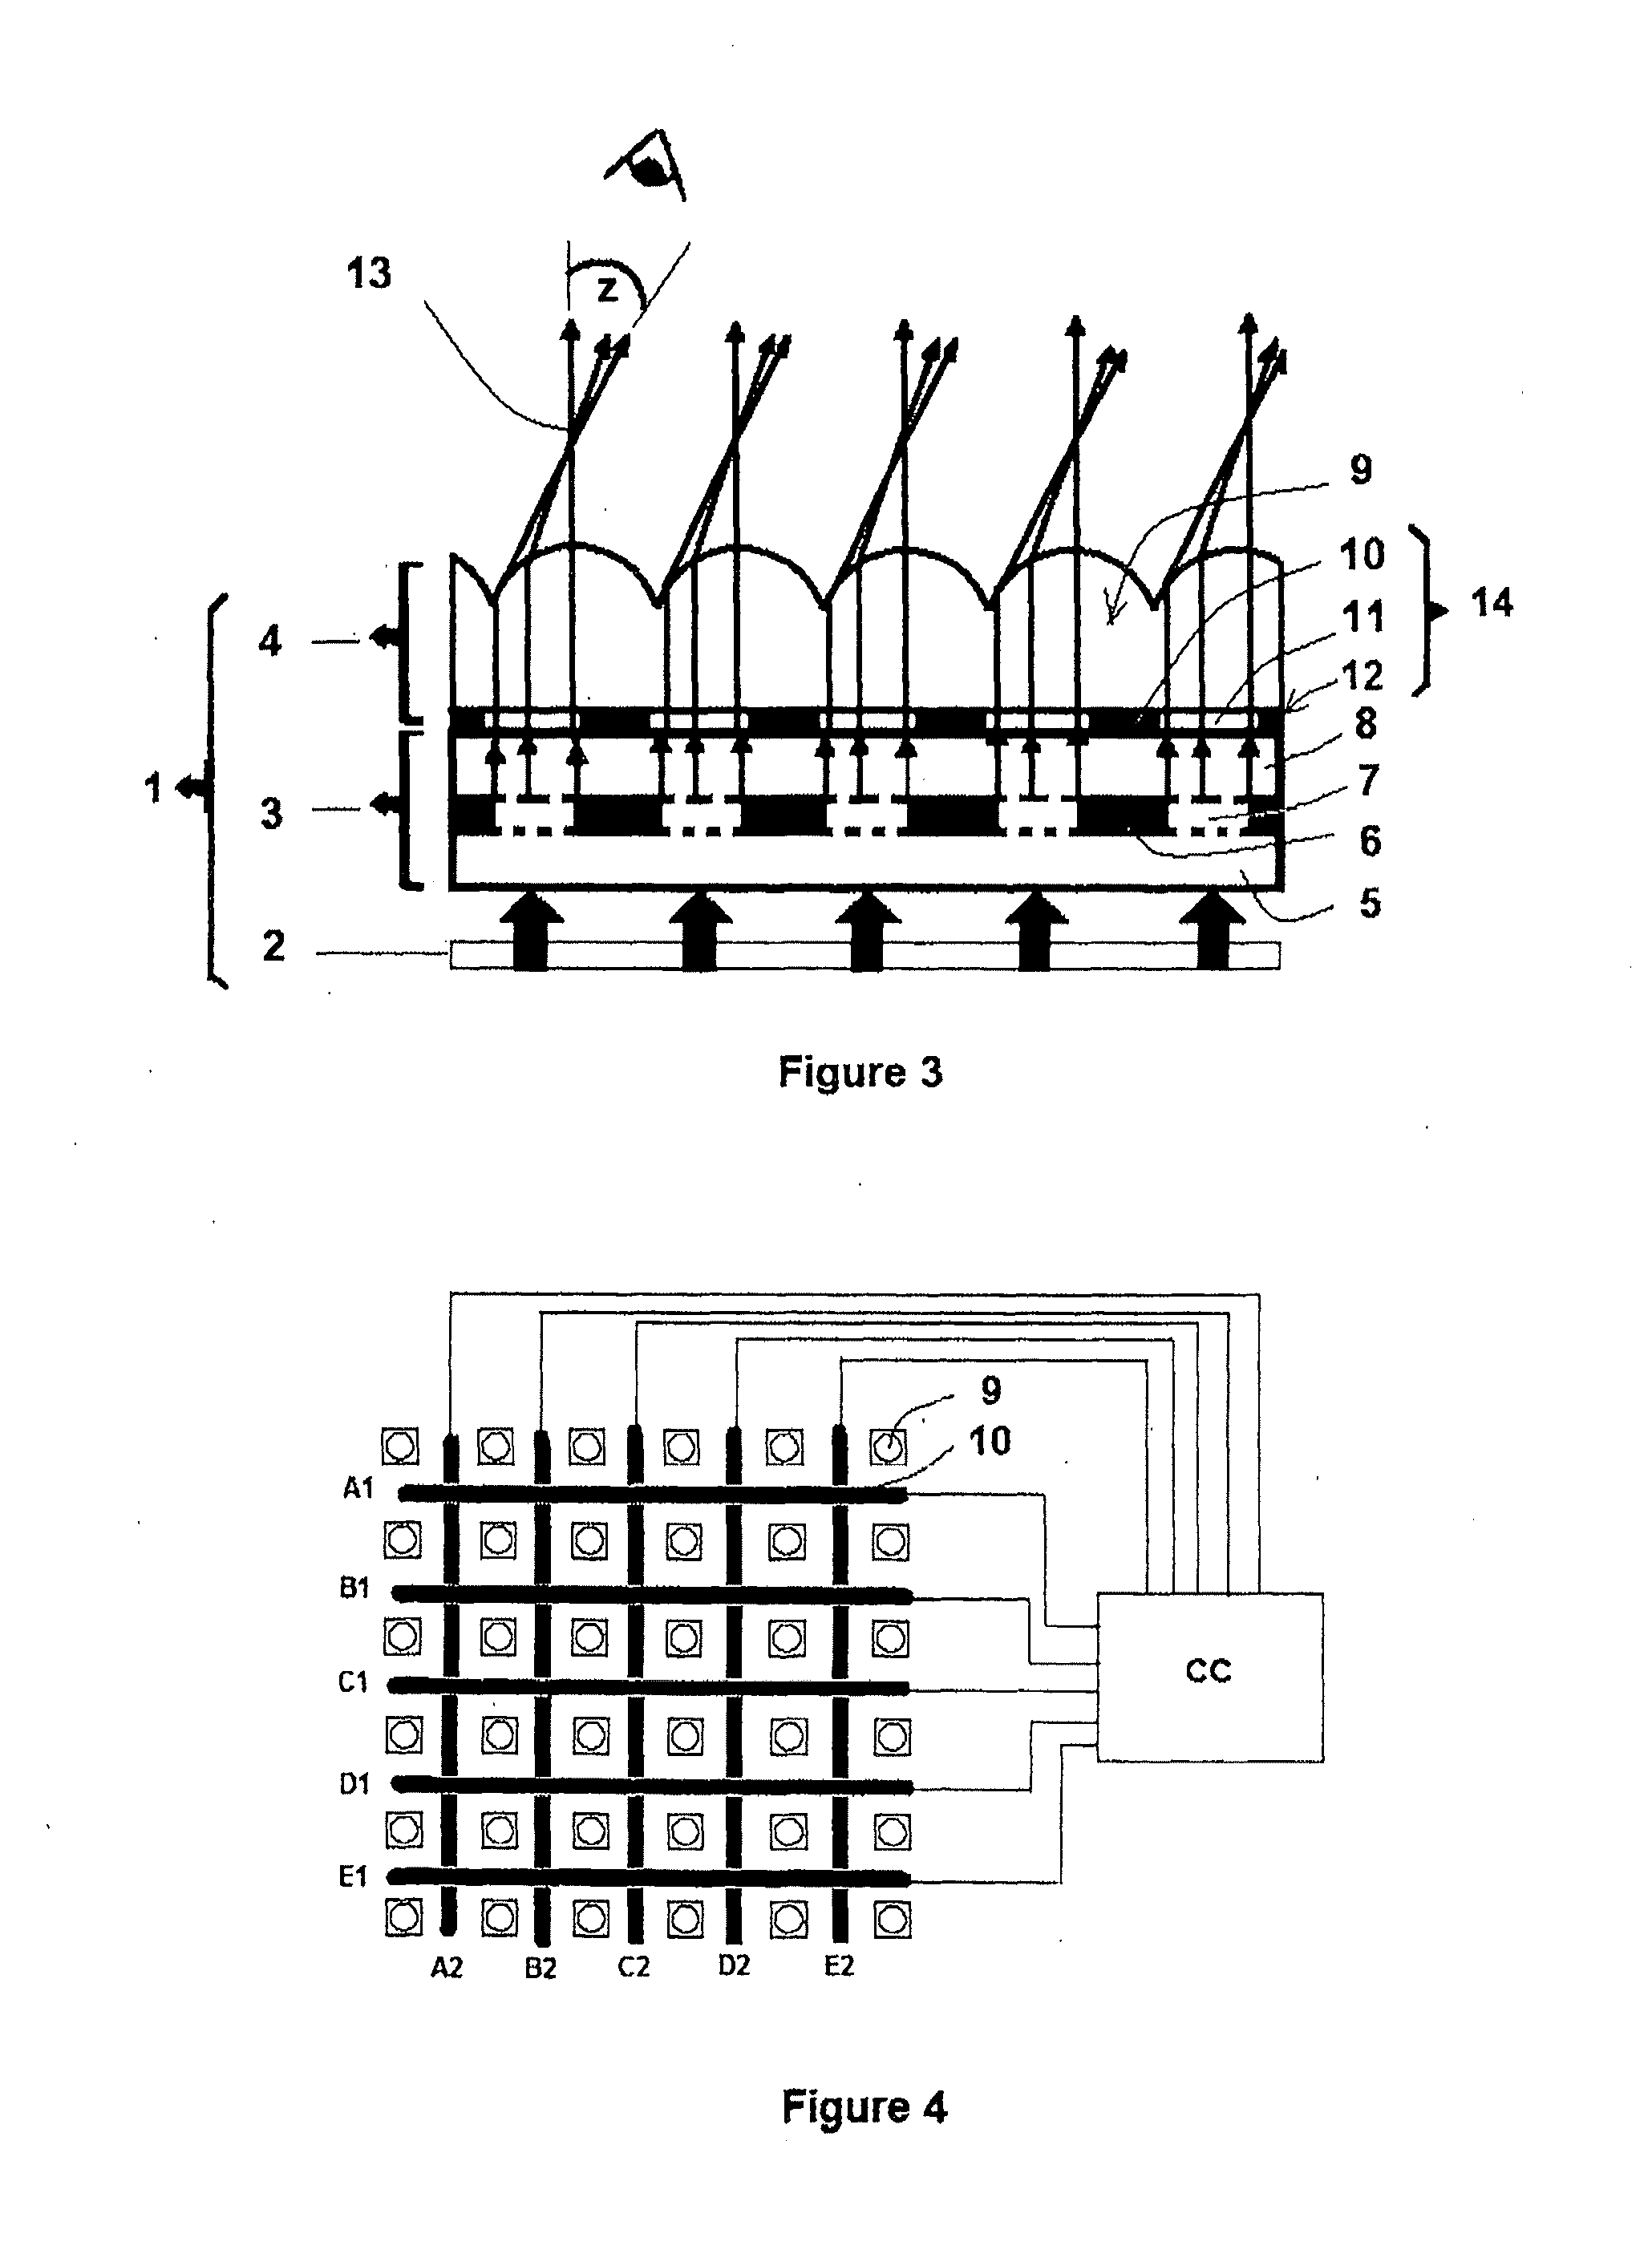 Display device including a multifunctional and communicating surface